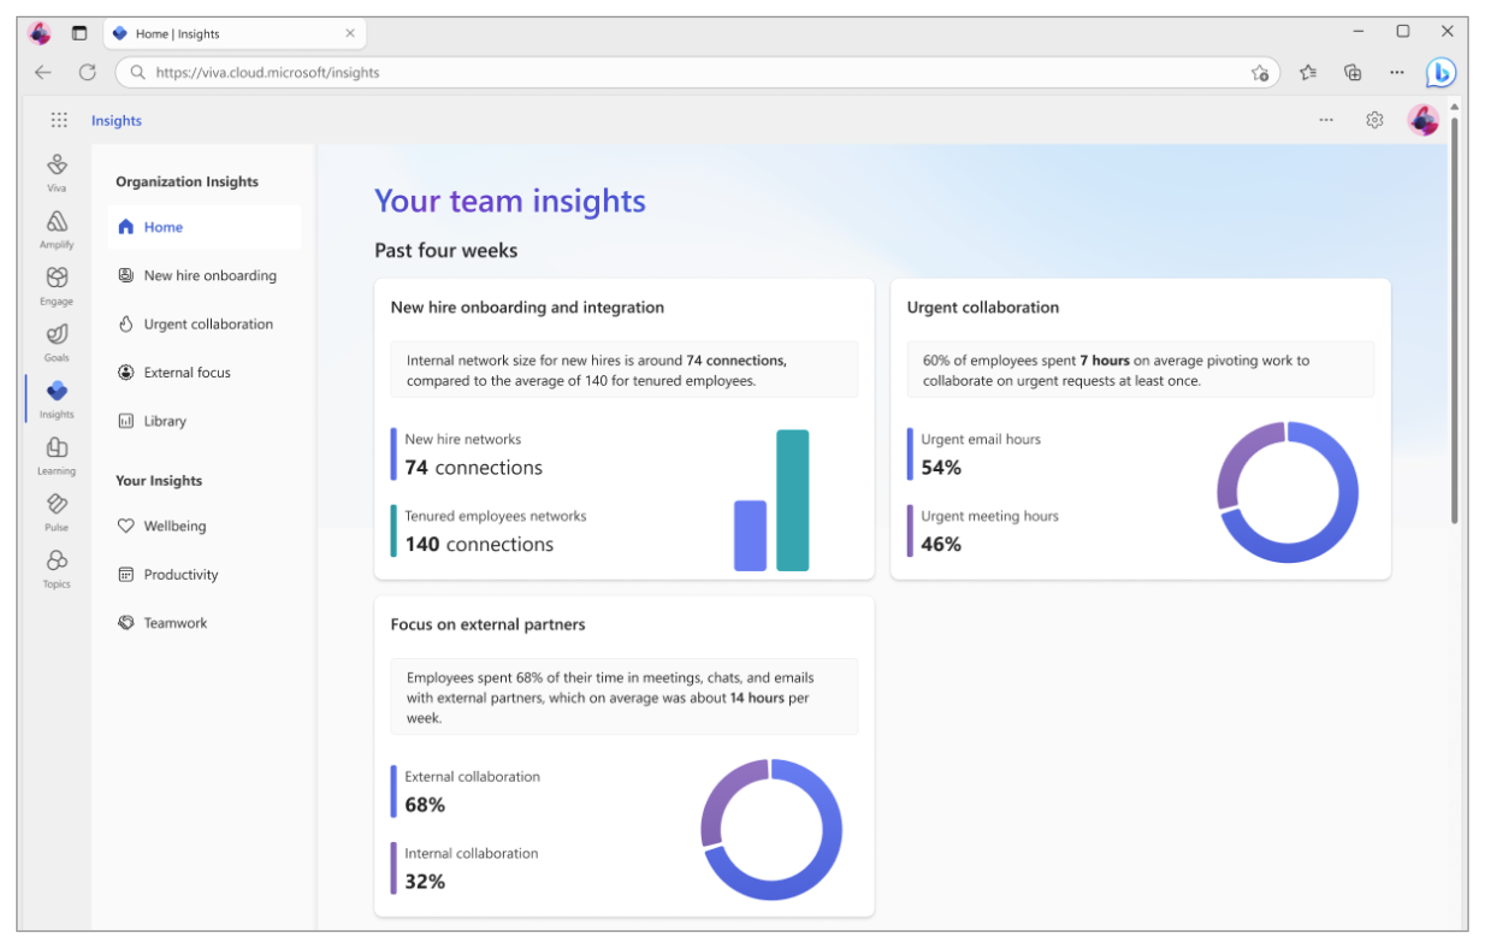 Image of team insights home page.